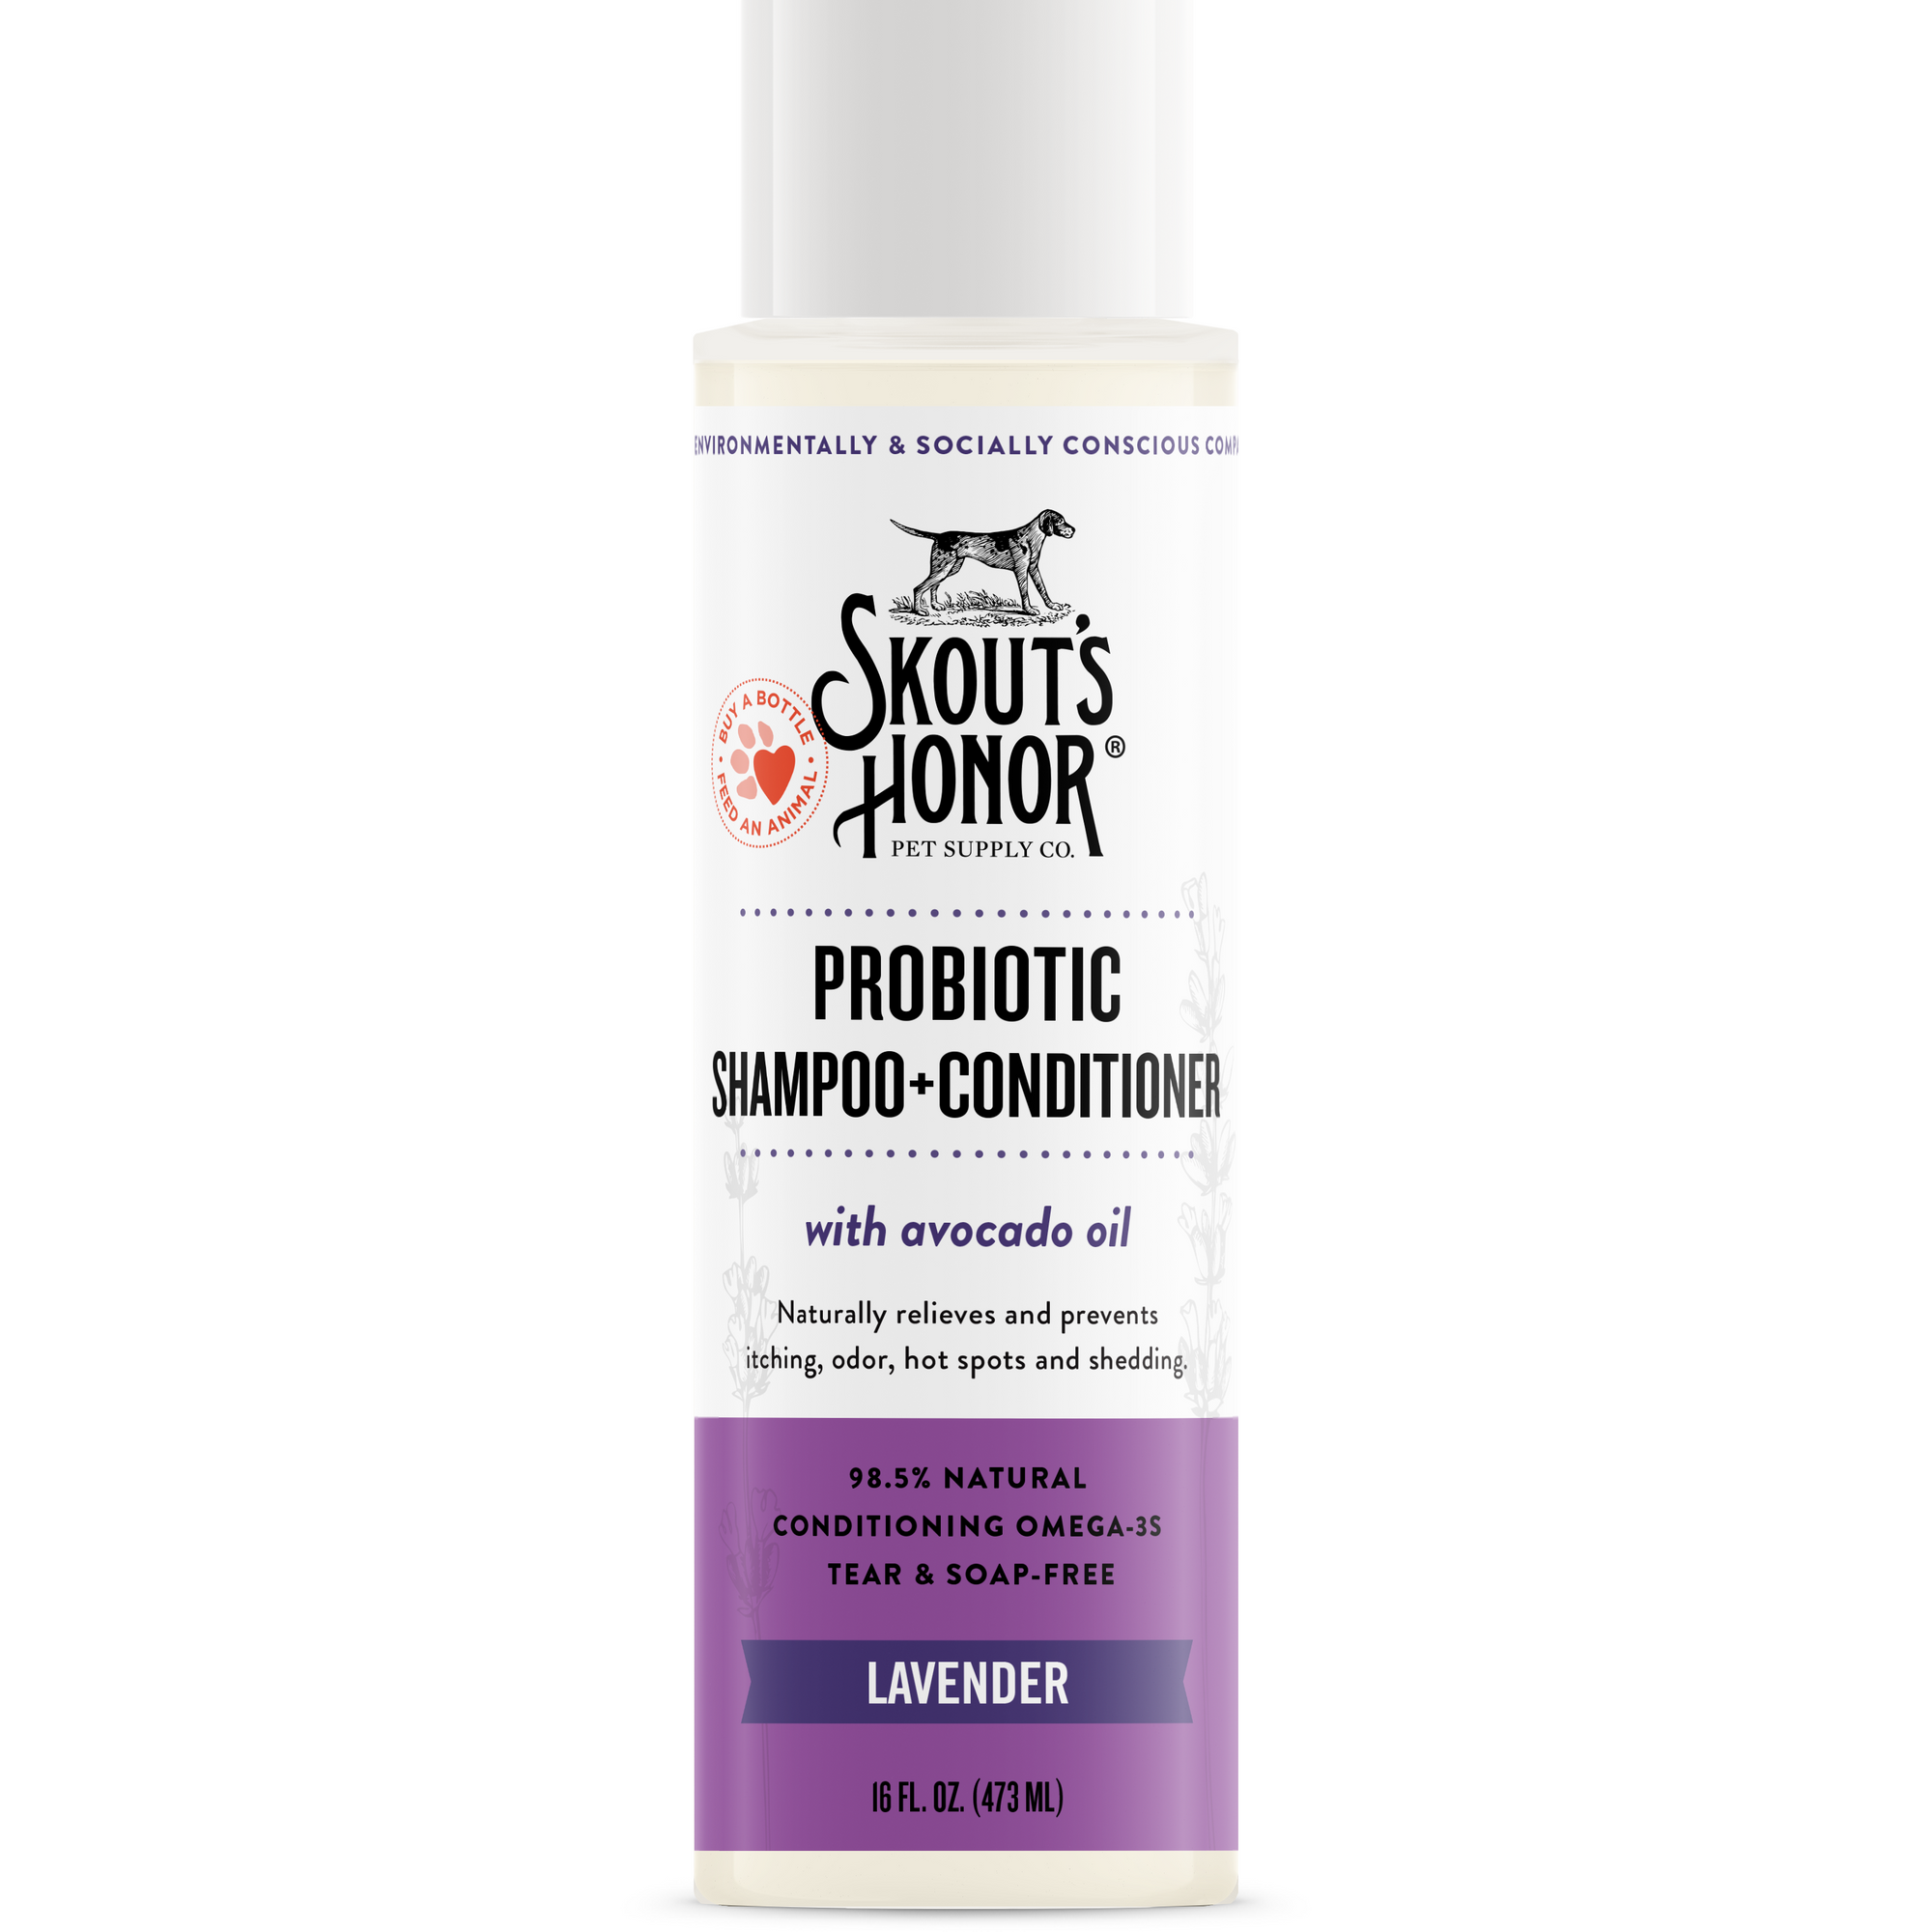 Skout's Honor - Probiotic Shampoo & Conditioners